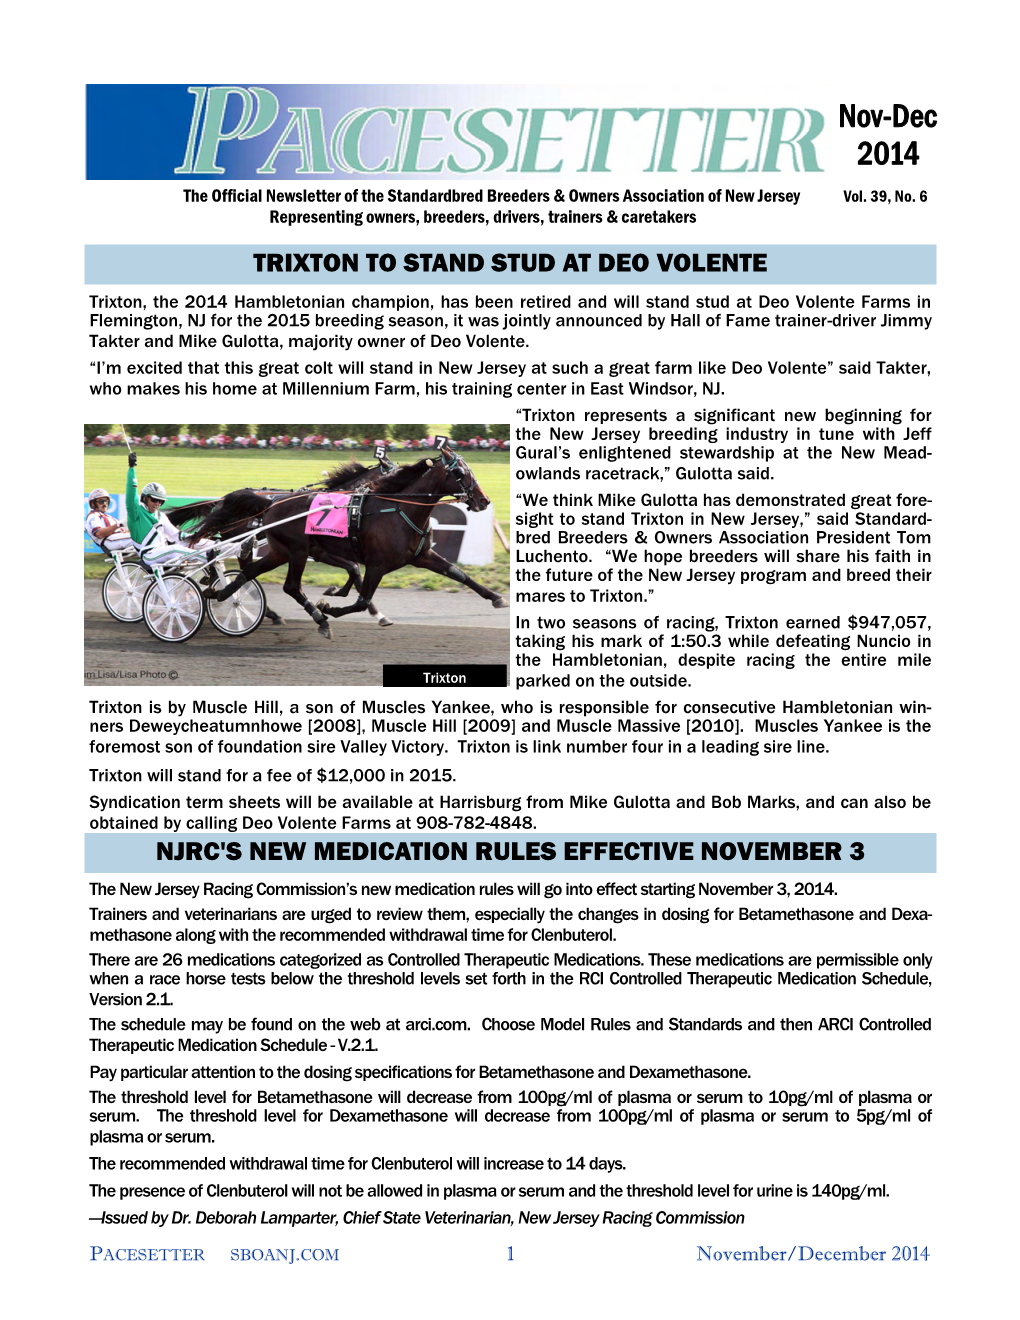 NOVEMBER 3 the New Jersey Racing Commission’S New Medication Rules Will Go Into Effect Starting November 3, 2014